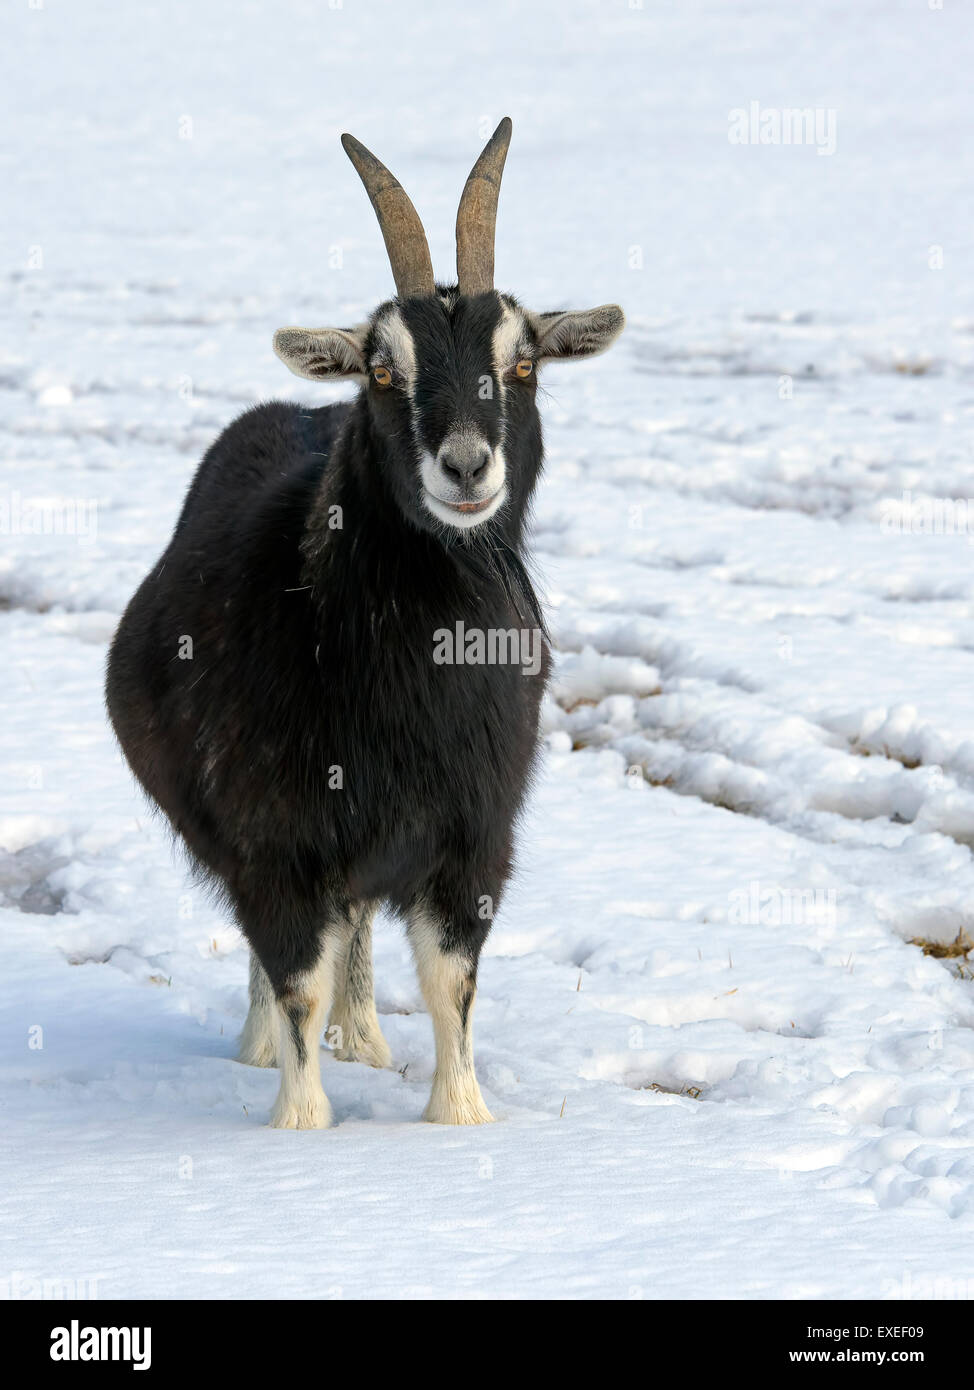 A Black Goat standing in the snow. Stock Photo